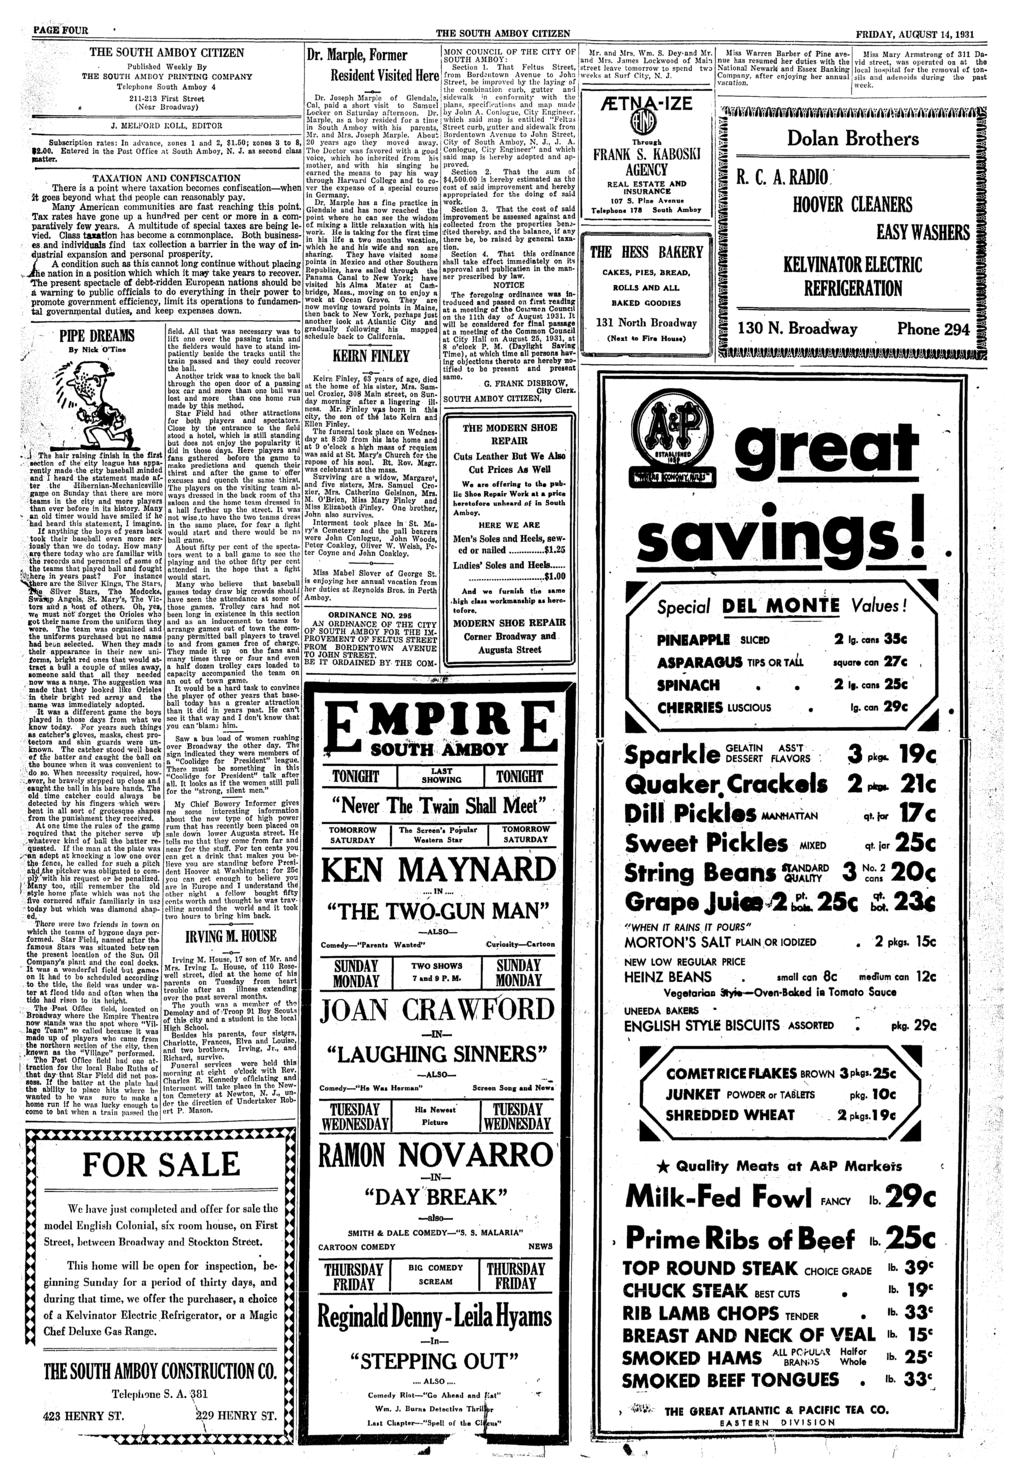 PAGE FOUR THE SOUTH AMBOY CITIZEN FRIDAY, AUQUST 14,1931 THE SOUTH AMBOY CITIZEN Published Weekly By THE SOUTH AMBOY PRINTING COMPANY Telephne Suth Amby 4 211-213 First Street I (Near Bradway) J.